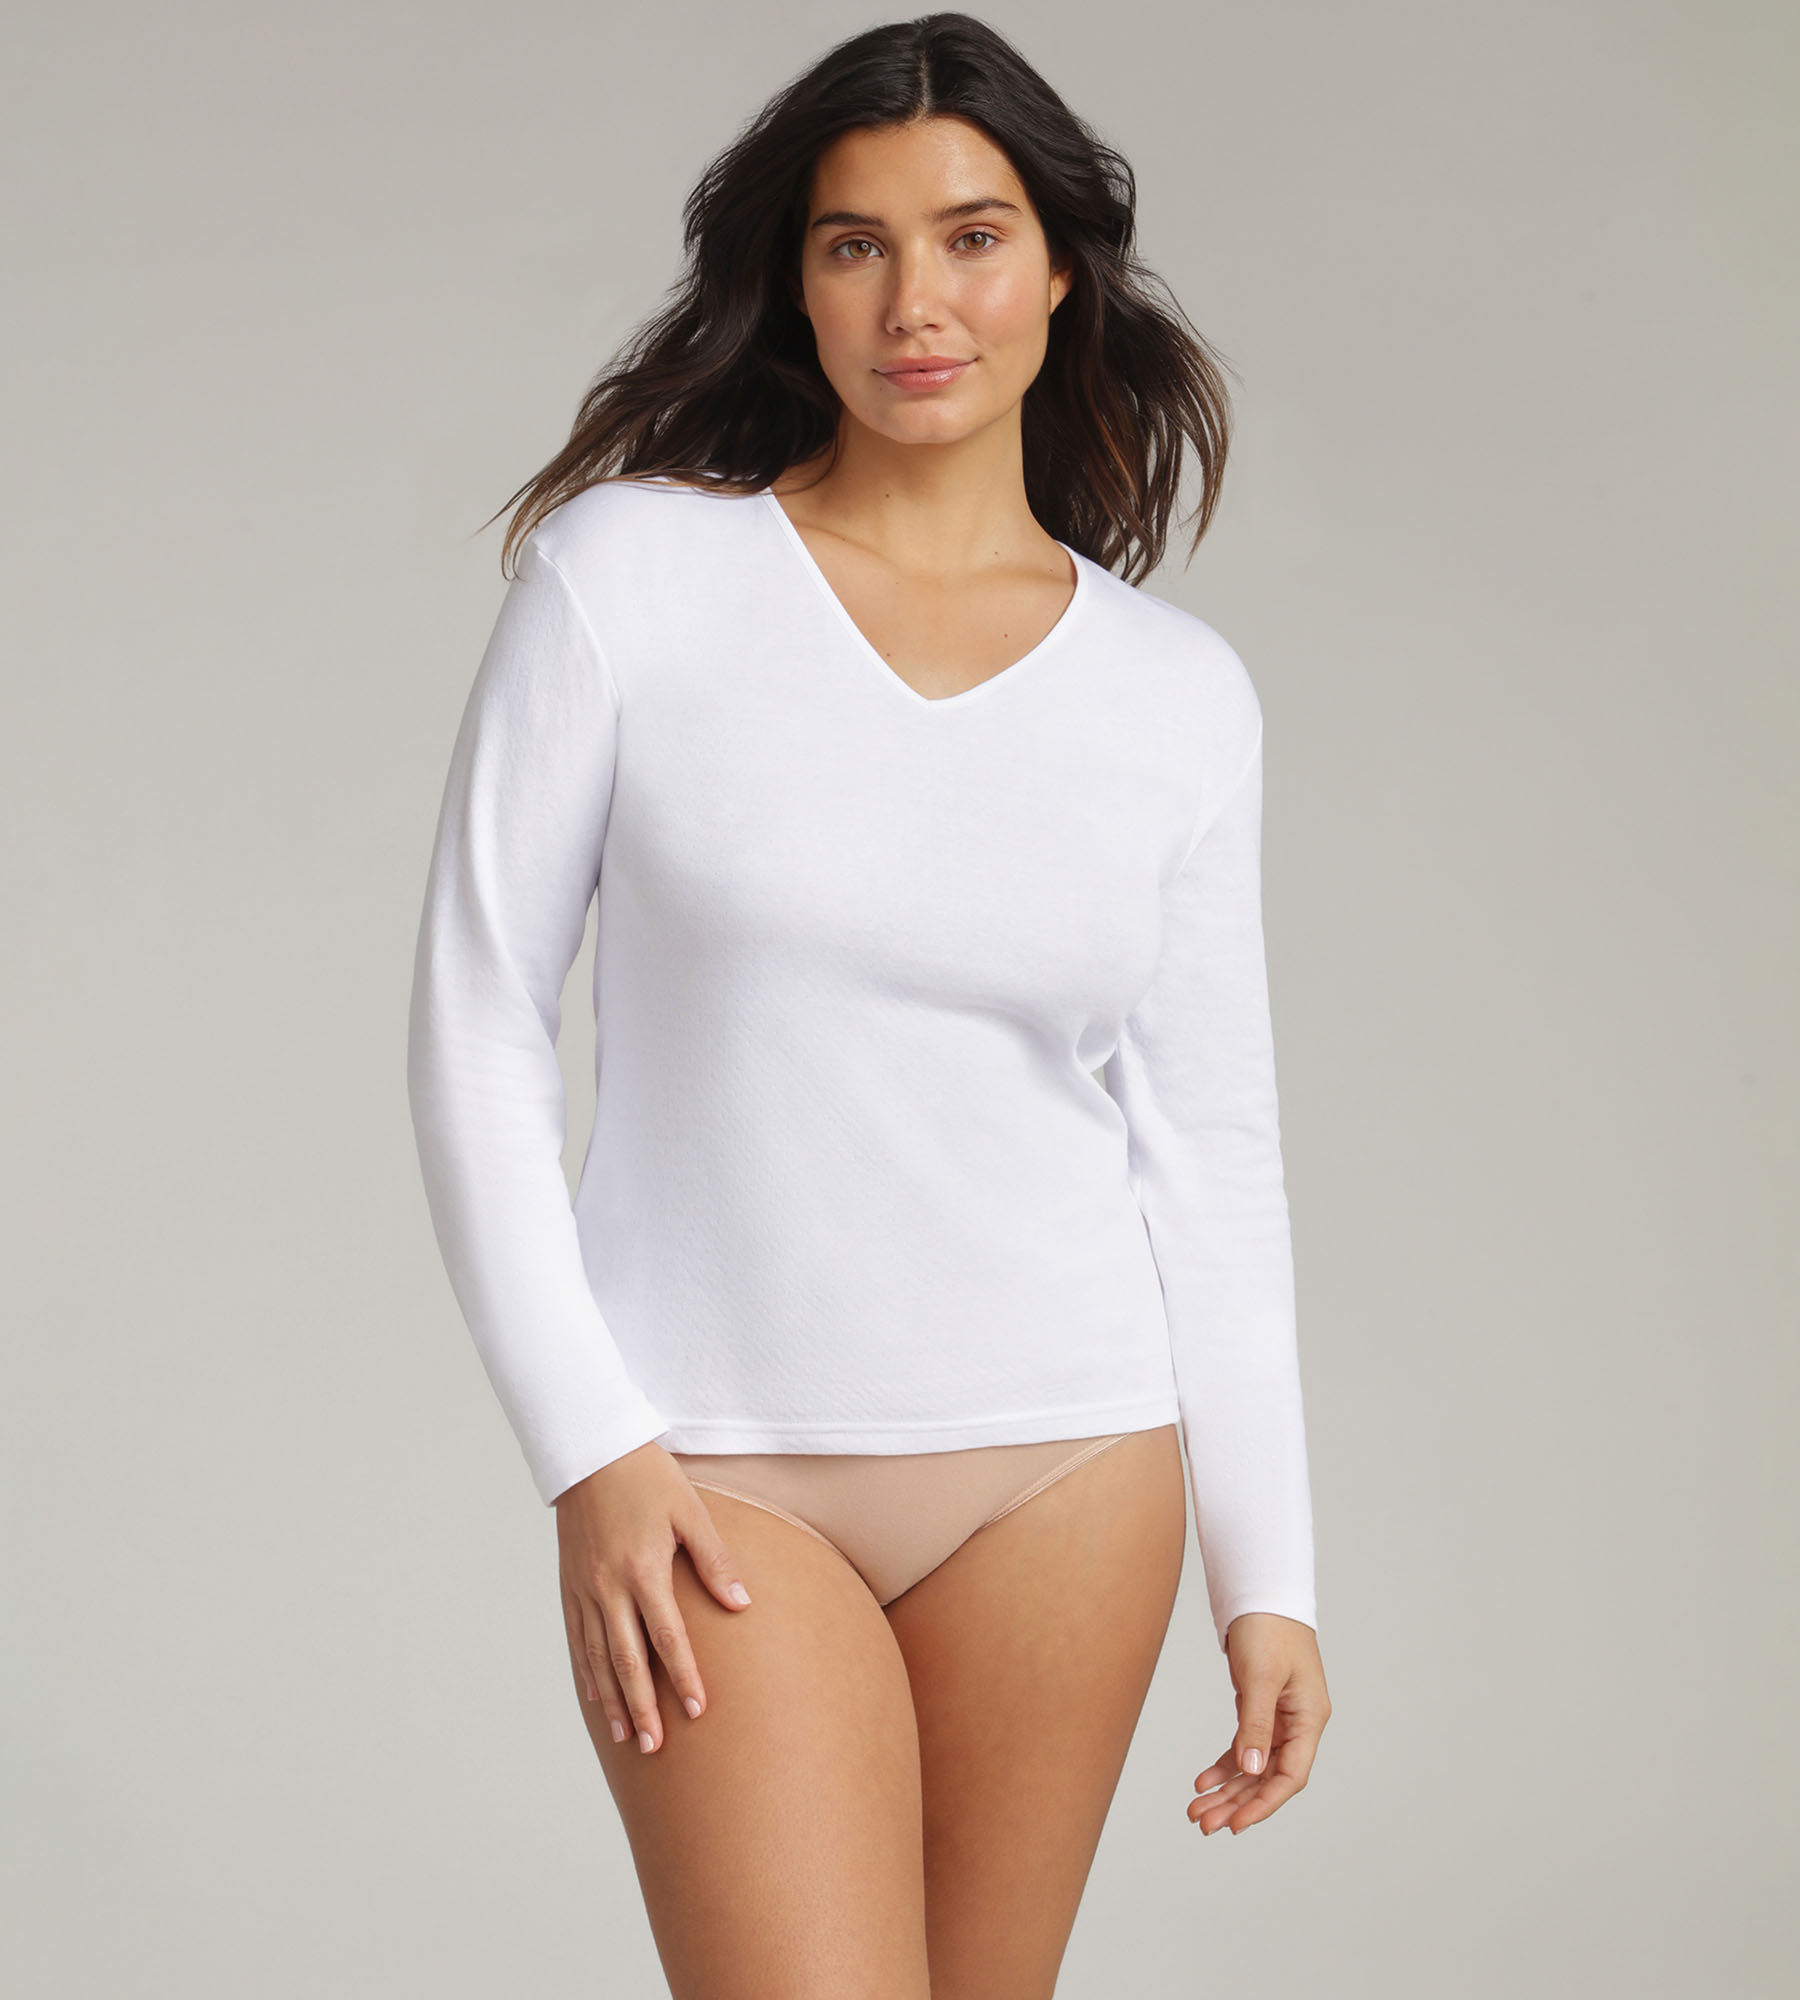 Long-sleeved t-shirt in white Thermal Natural, , PLAYTEX